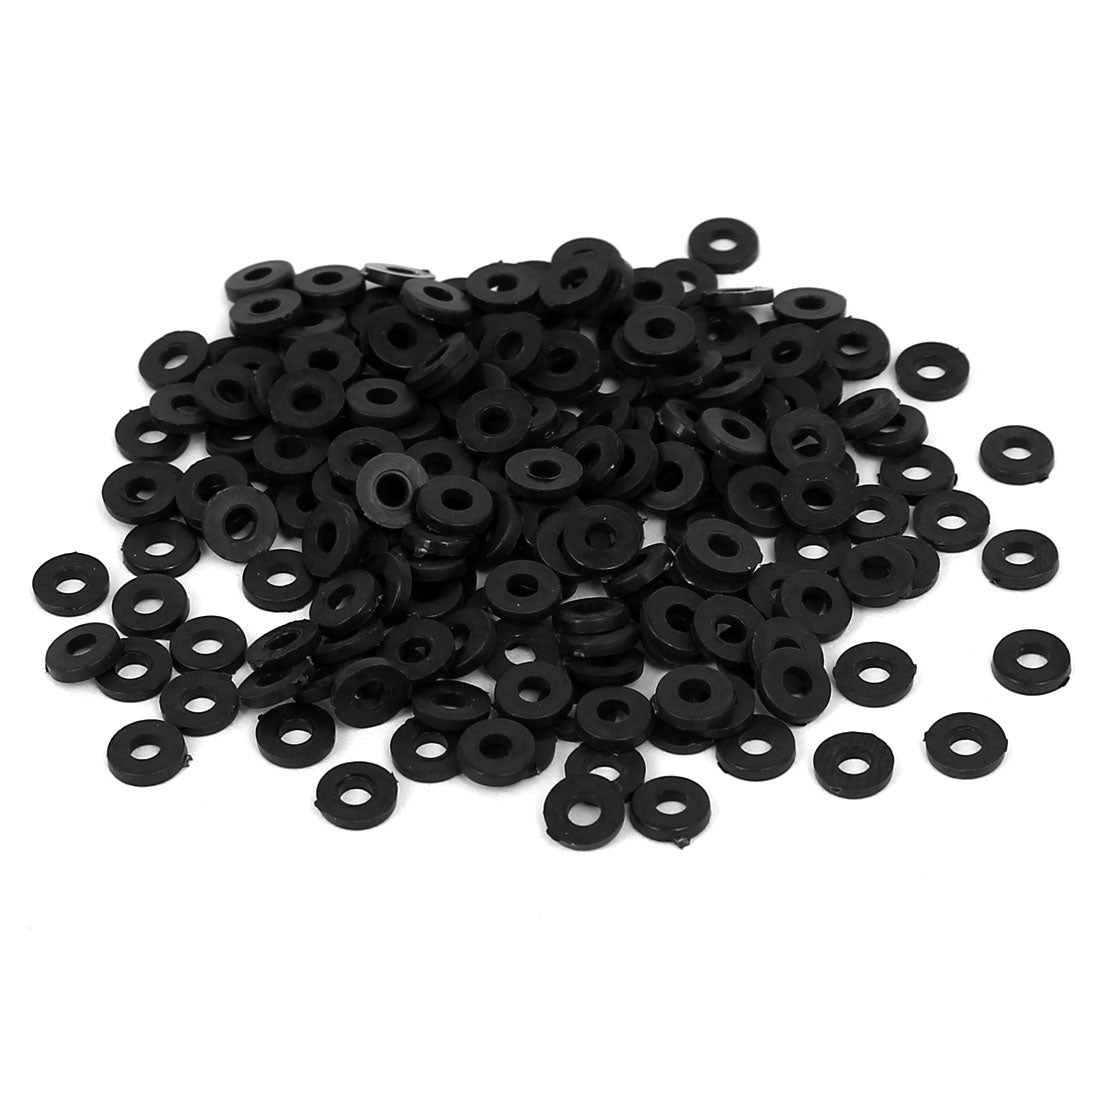 Uxcell Uxcell 4mm x 10mm x 1mm Nylon Flat Insulating Washers Gaskets Spacers Black 300PCS